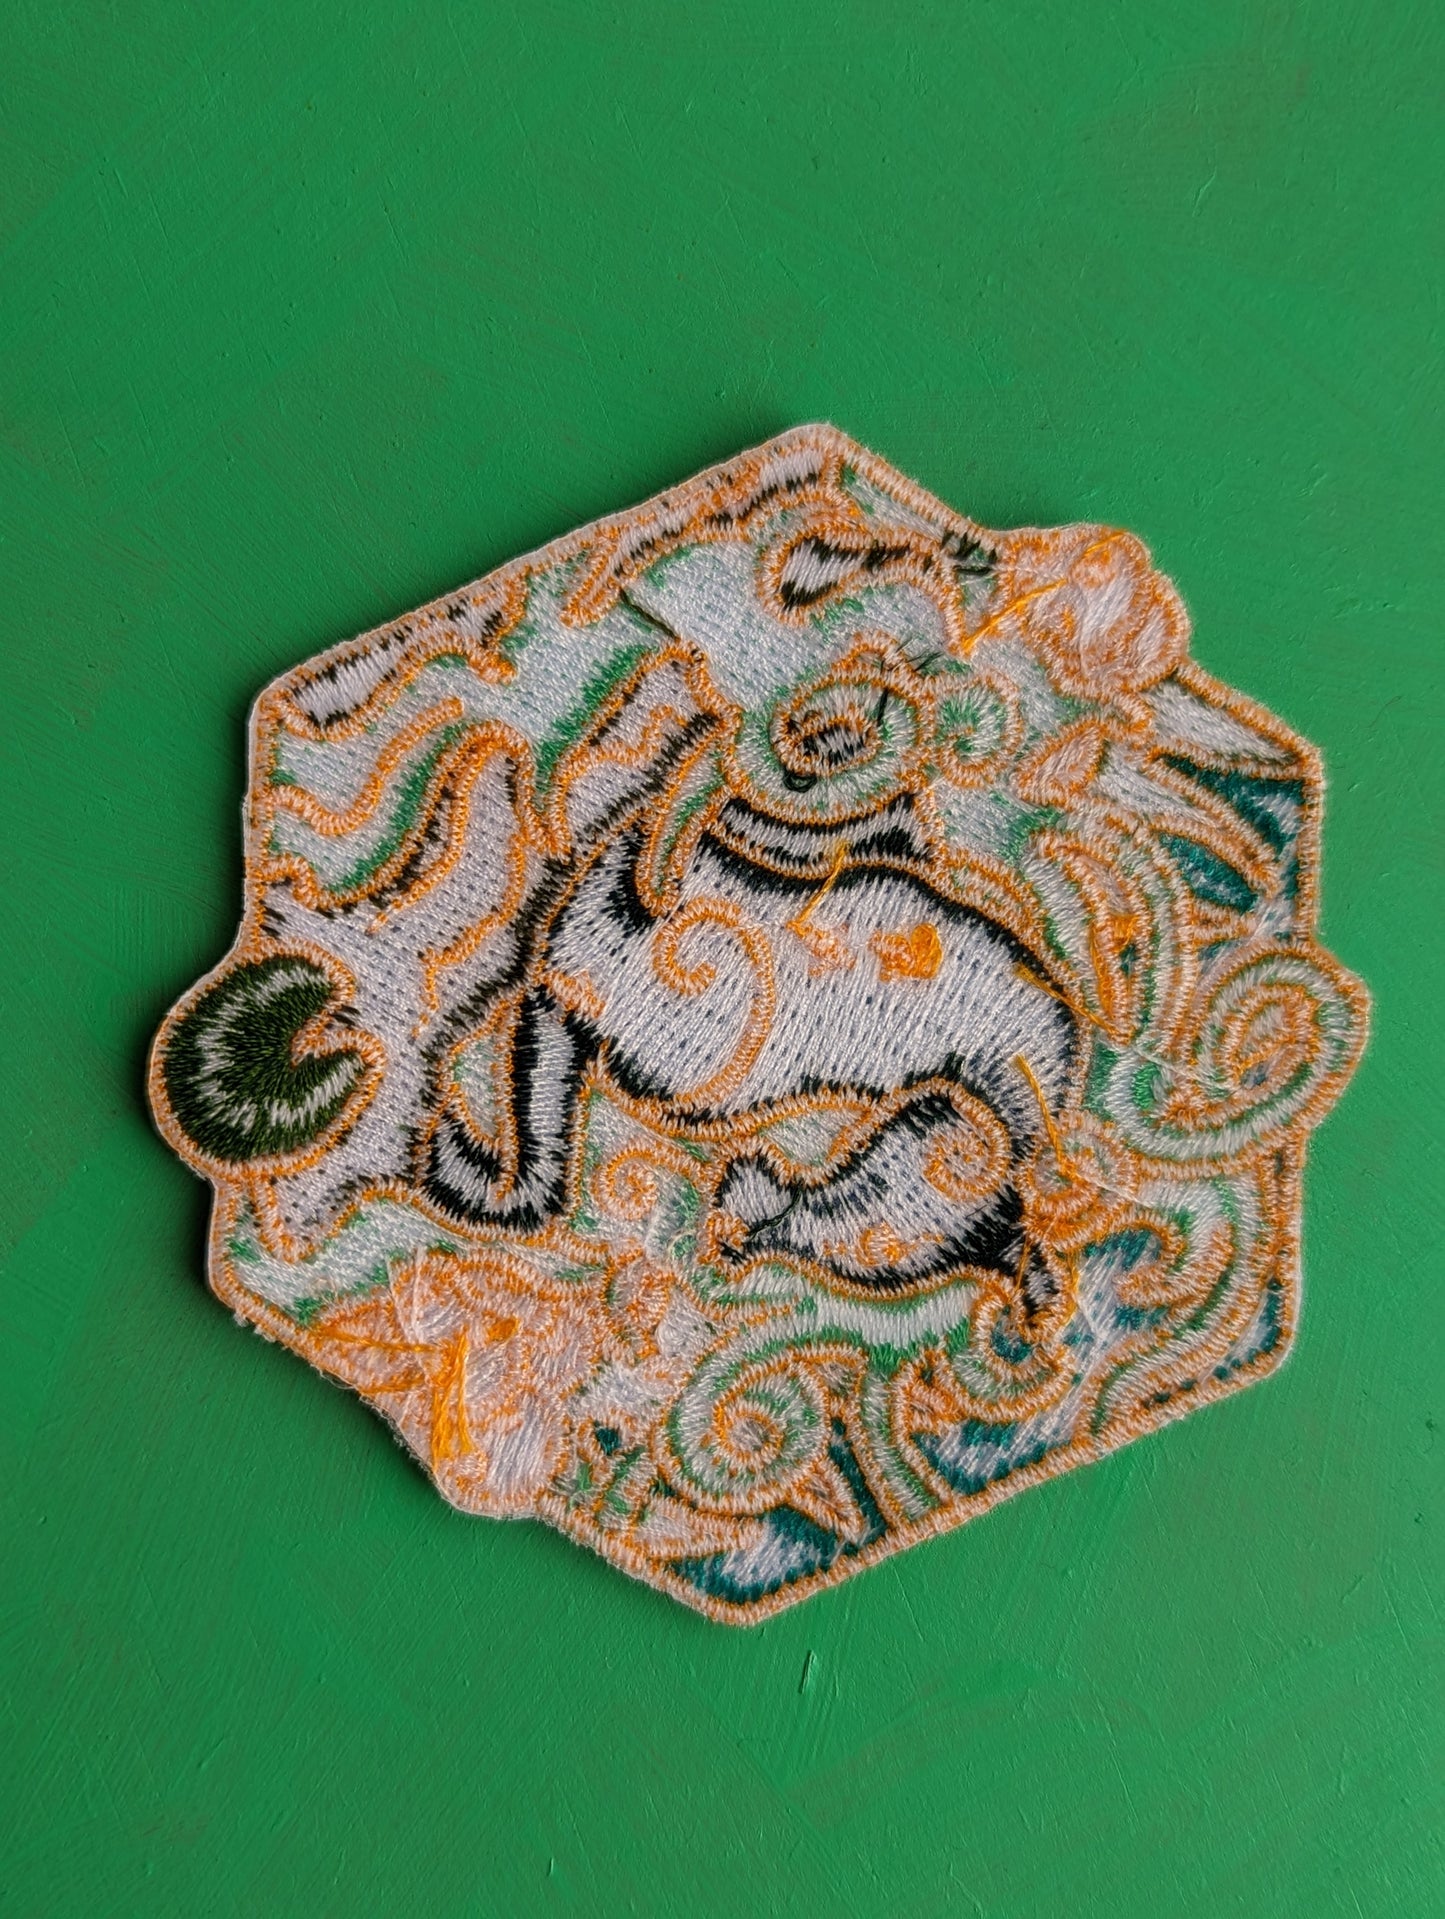 Celtic Kelpie Embroidered Iron Sew on Patch | Celtic Cryptids Patches